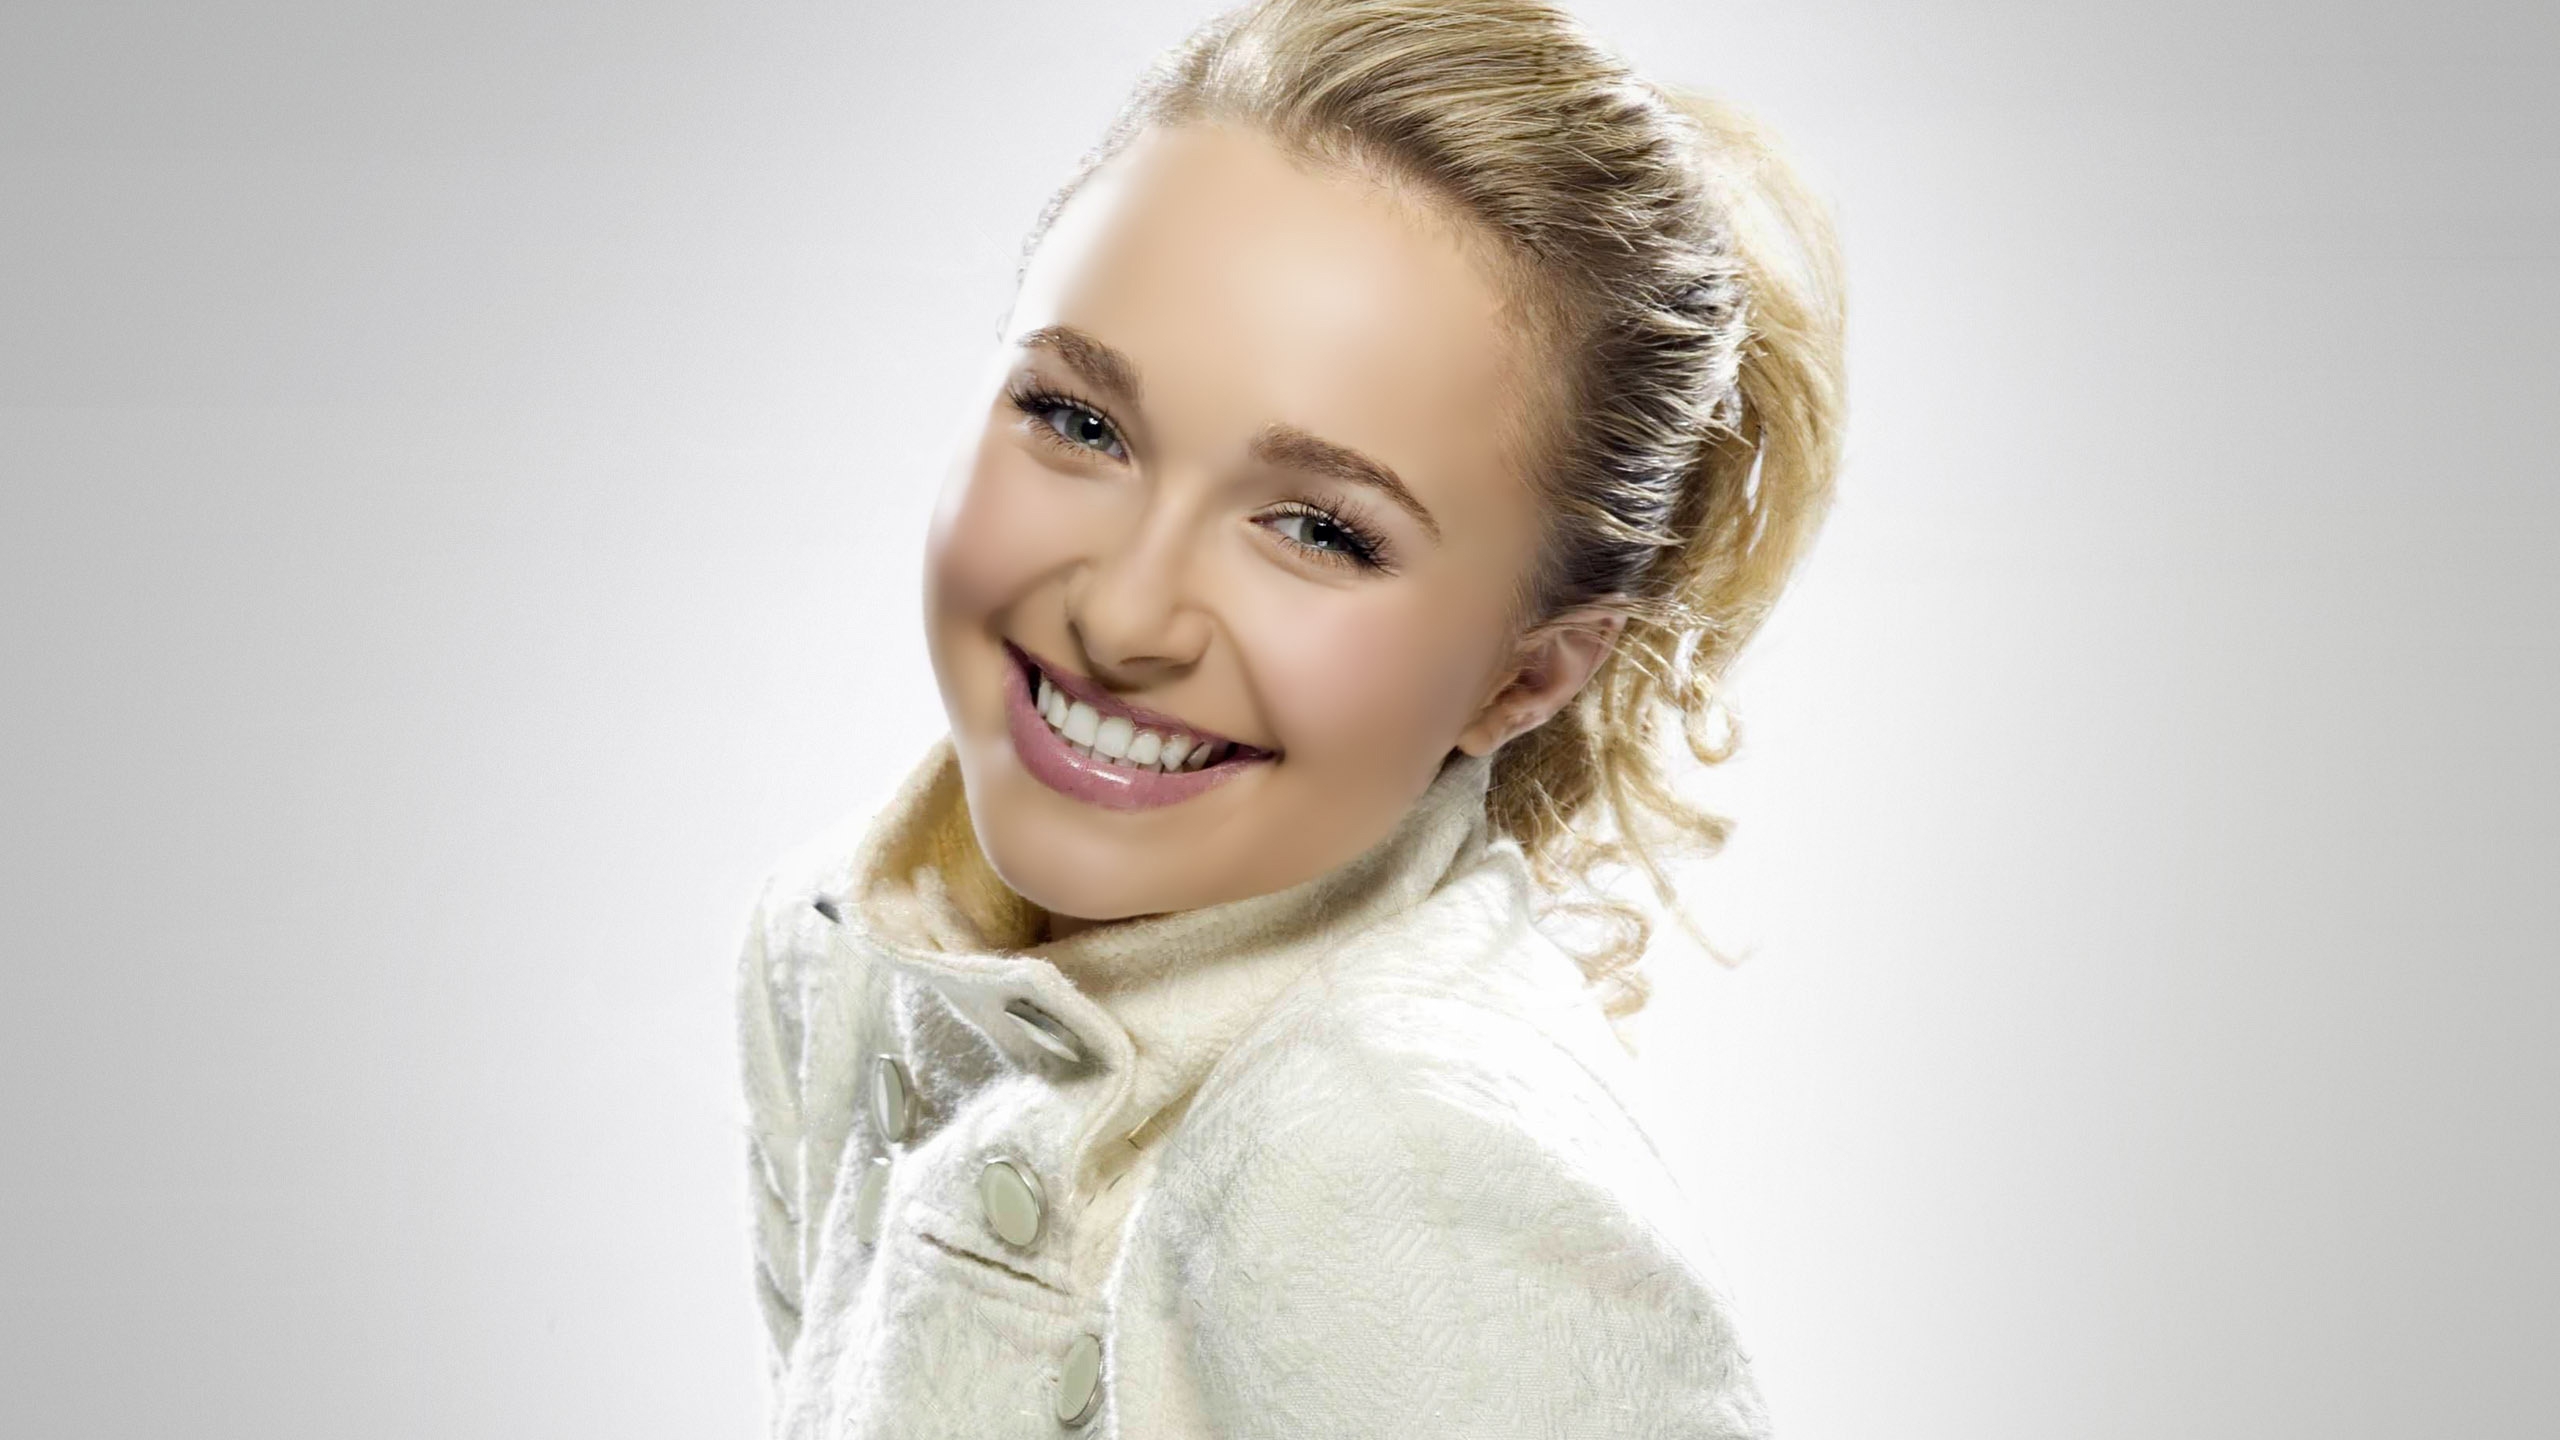 Hayden Panettiere Cute Smile for 2560x1440 HDTV resolution